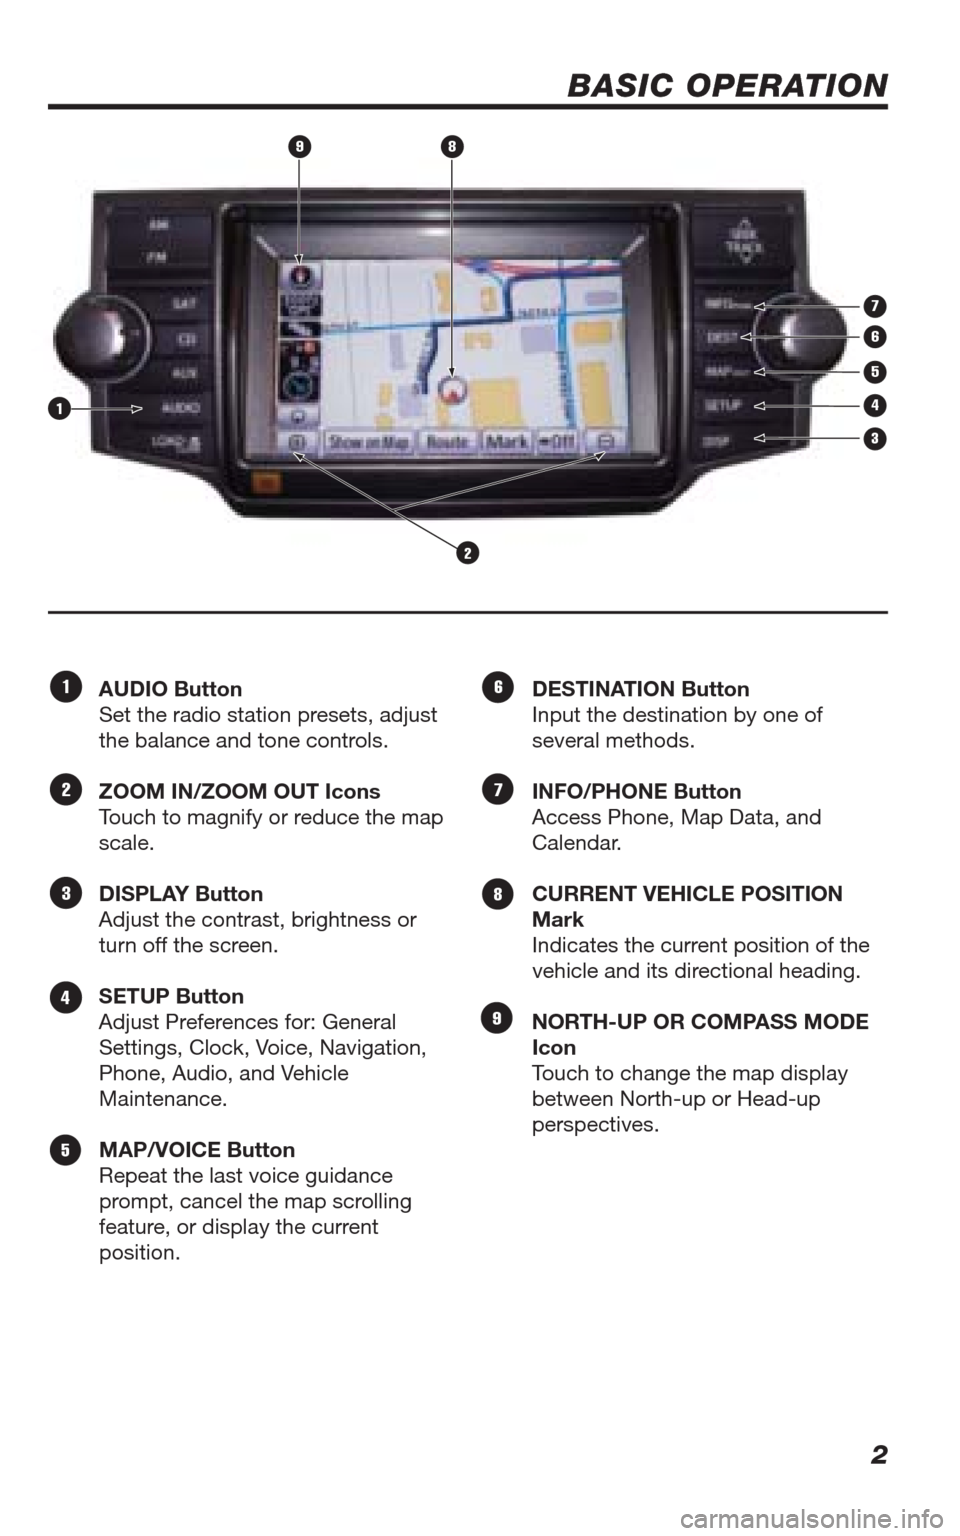 TOYOTA 4RUNNER 2010 N280 / 5.G Navigation Manual 2
BASIC OPERATION
AUDIO Button
Set the radio station presets, adjust 
the balance and tone controls. 
ZOOM IN/ZOOM OUT Icons
Touch to magnify or reduce the map 
scale. 
DISPLAY Button
Adjust the contr